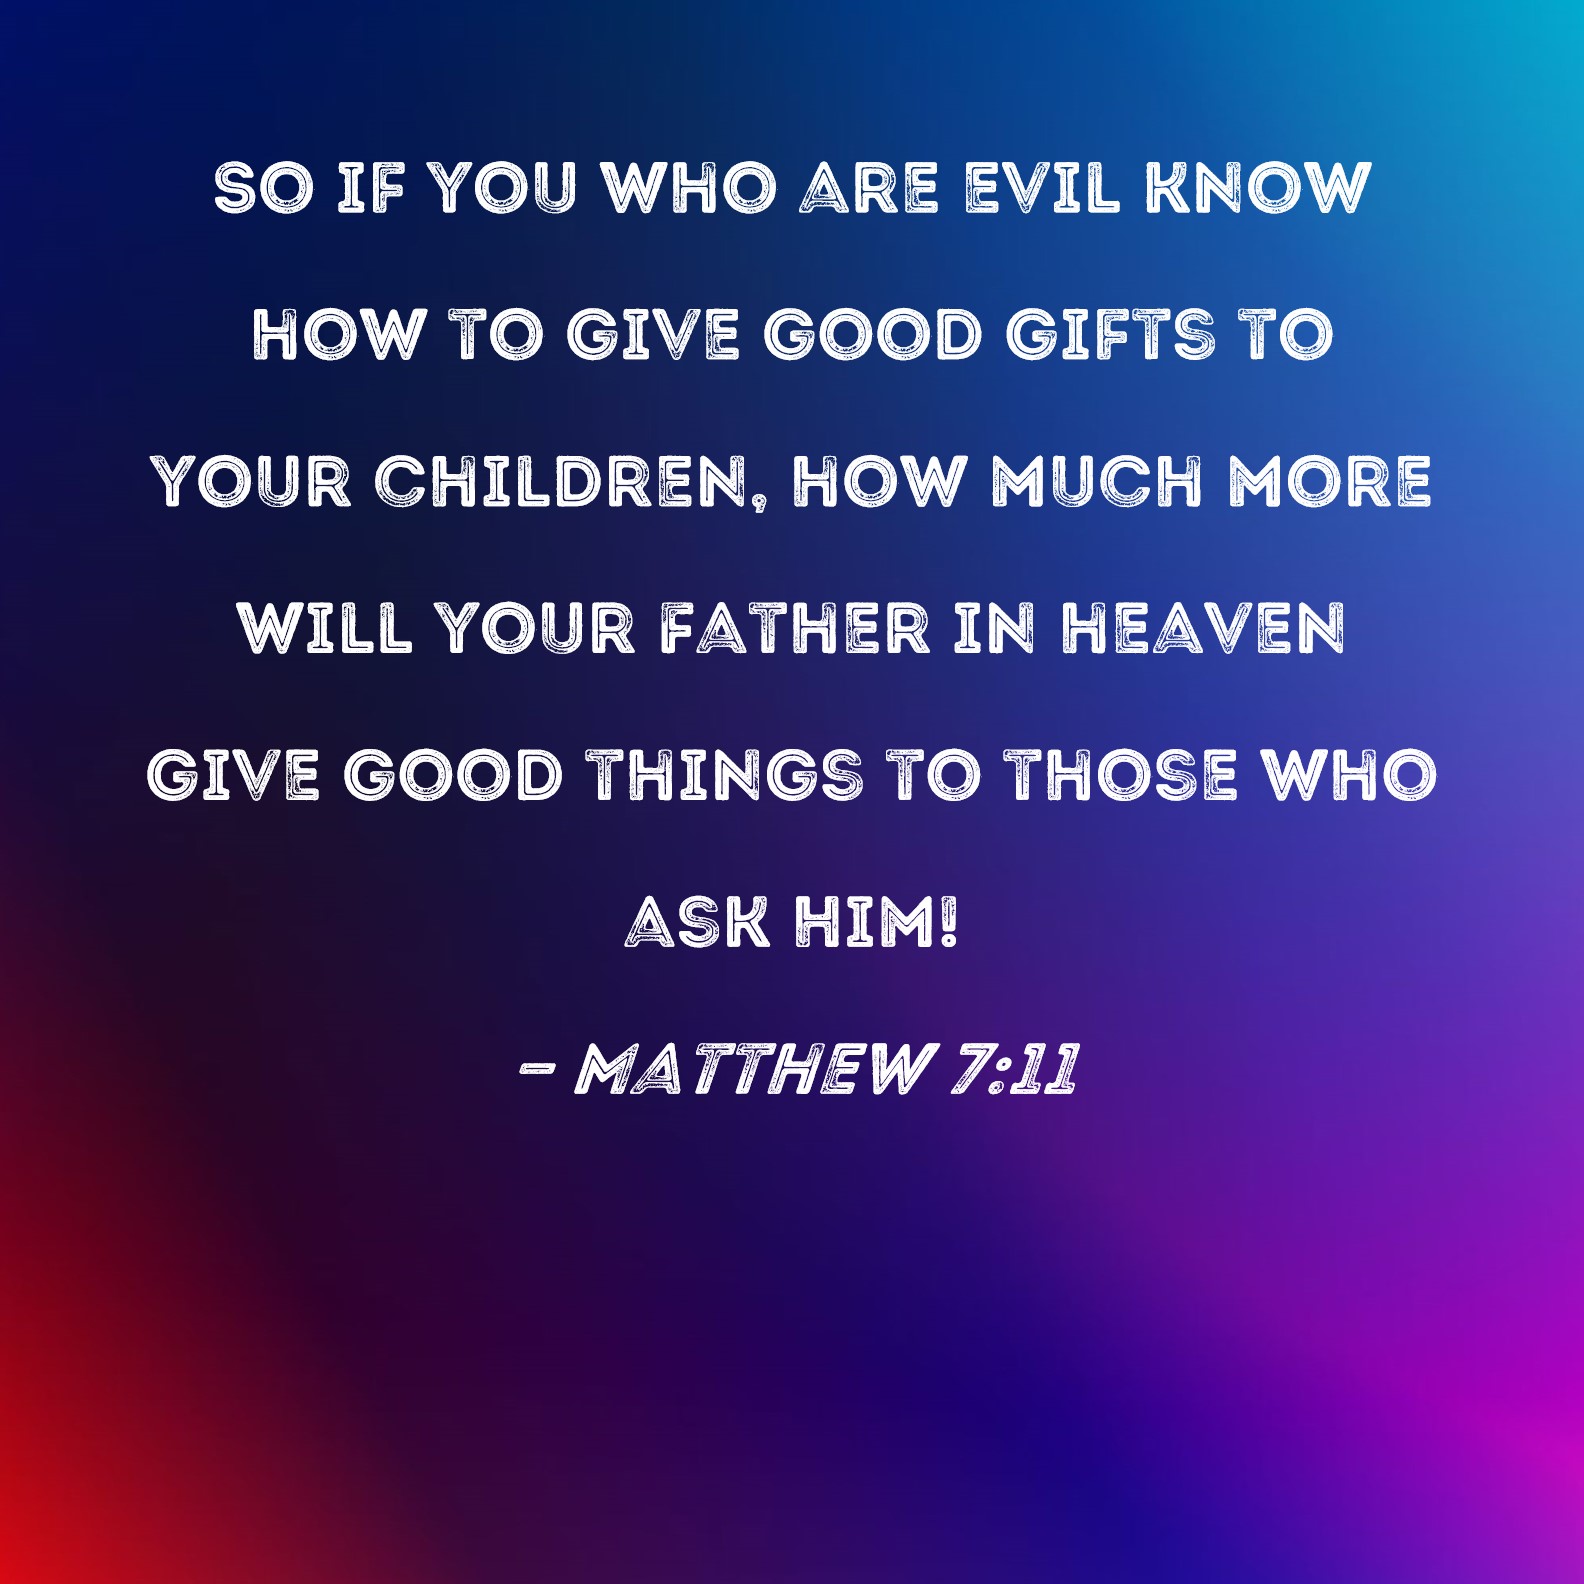 matthew-7-11-so-if-you-who-are-evil-know-how-to-give-good-gifts-to-your